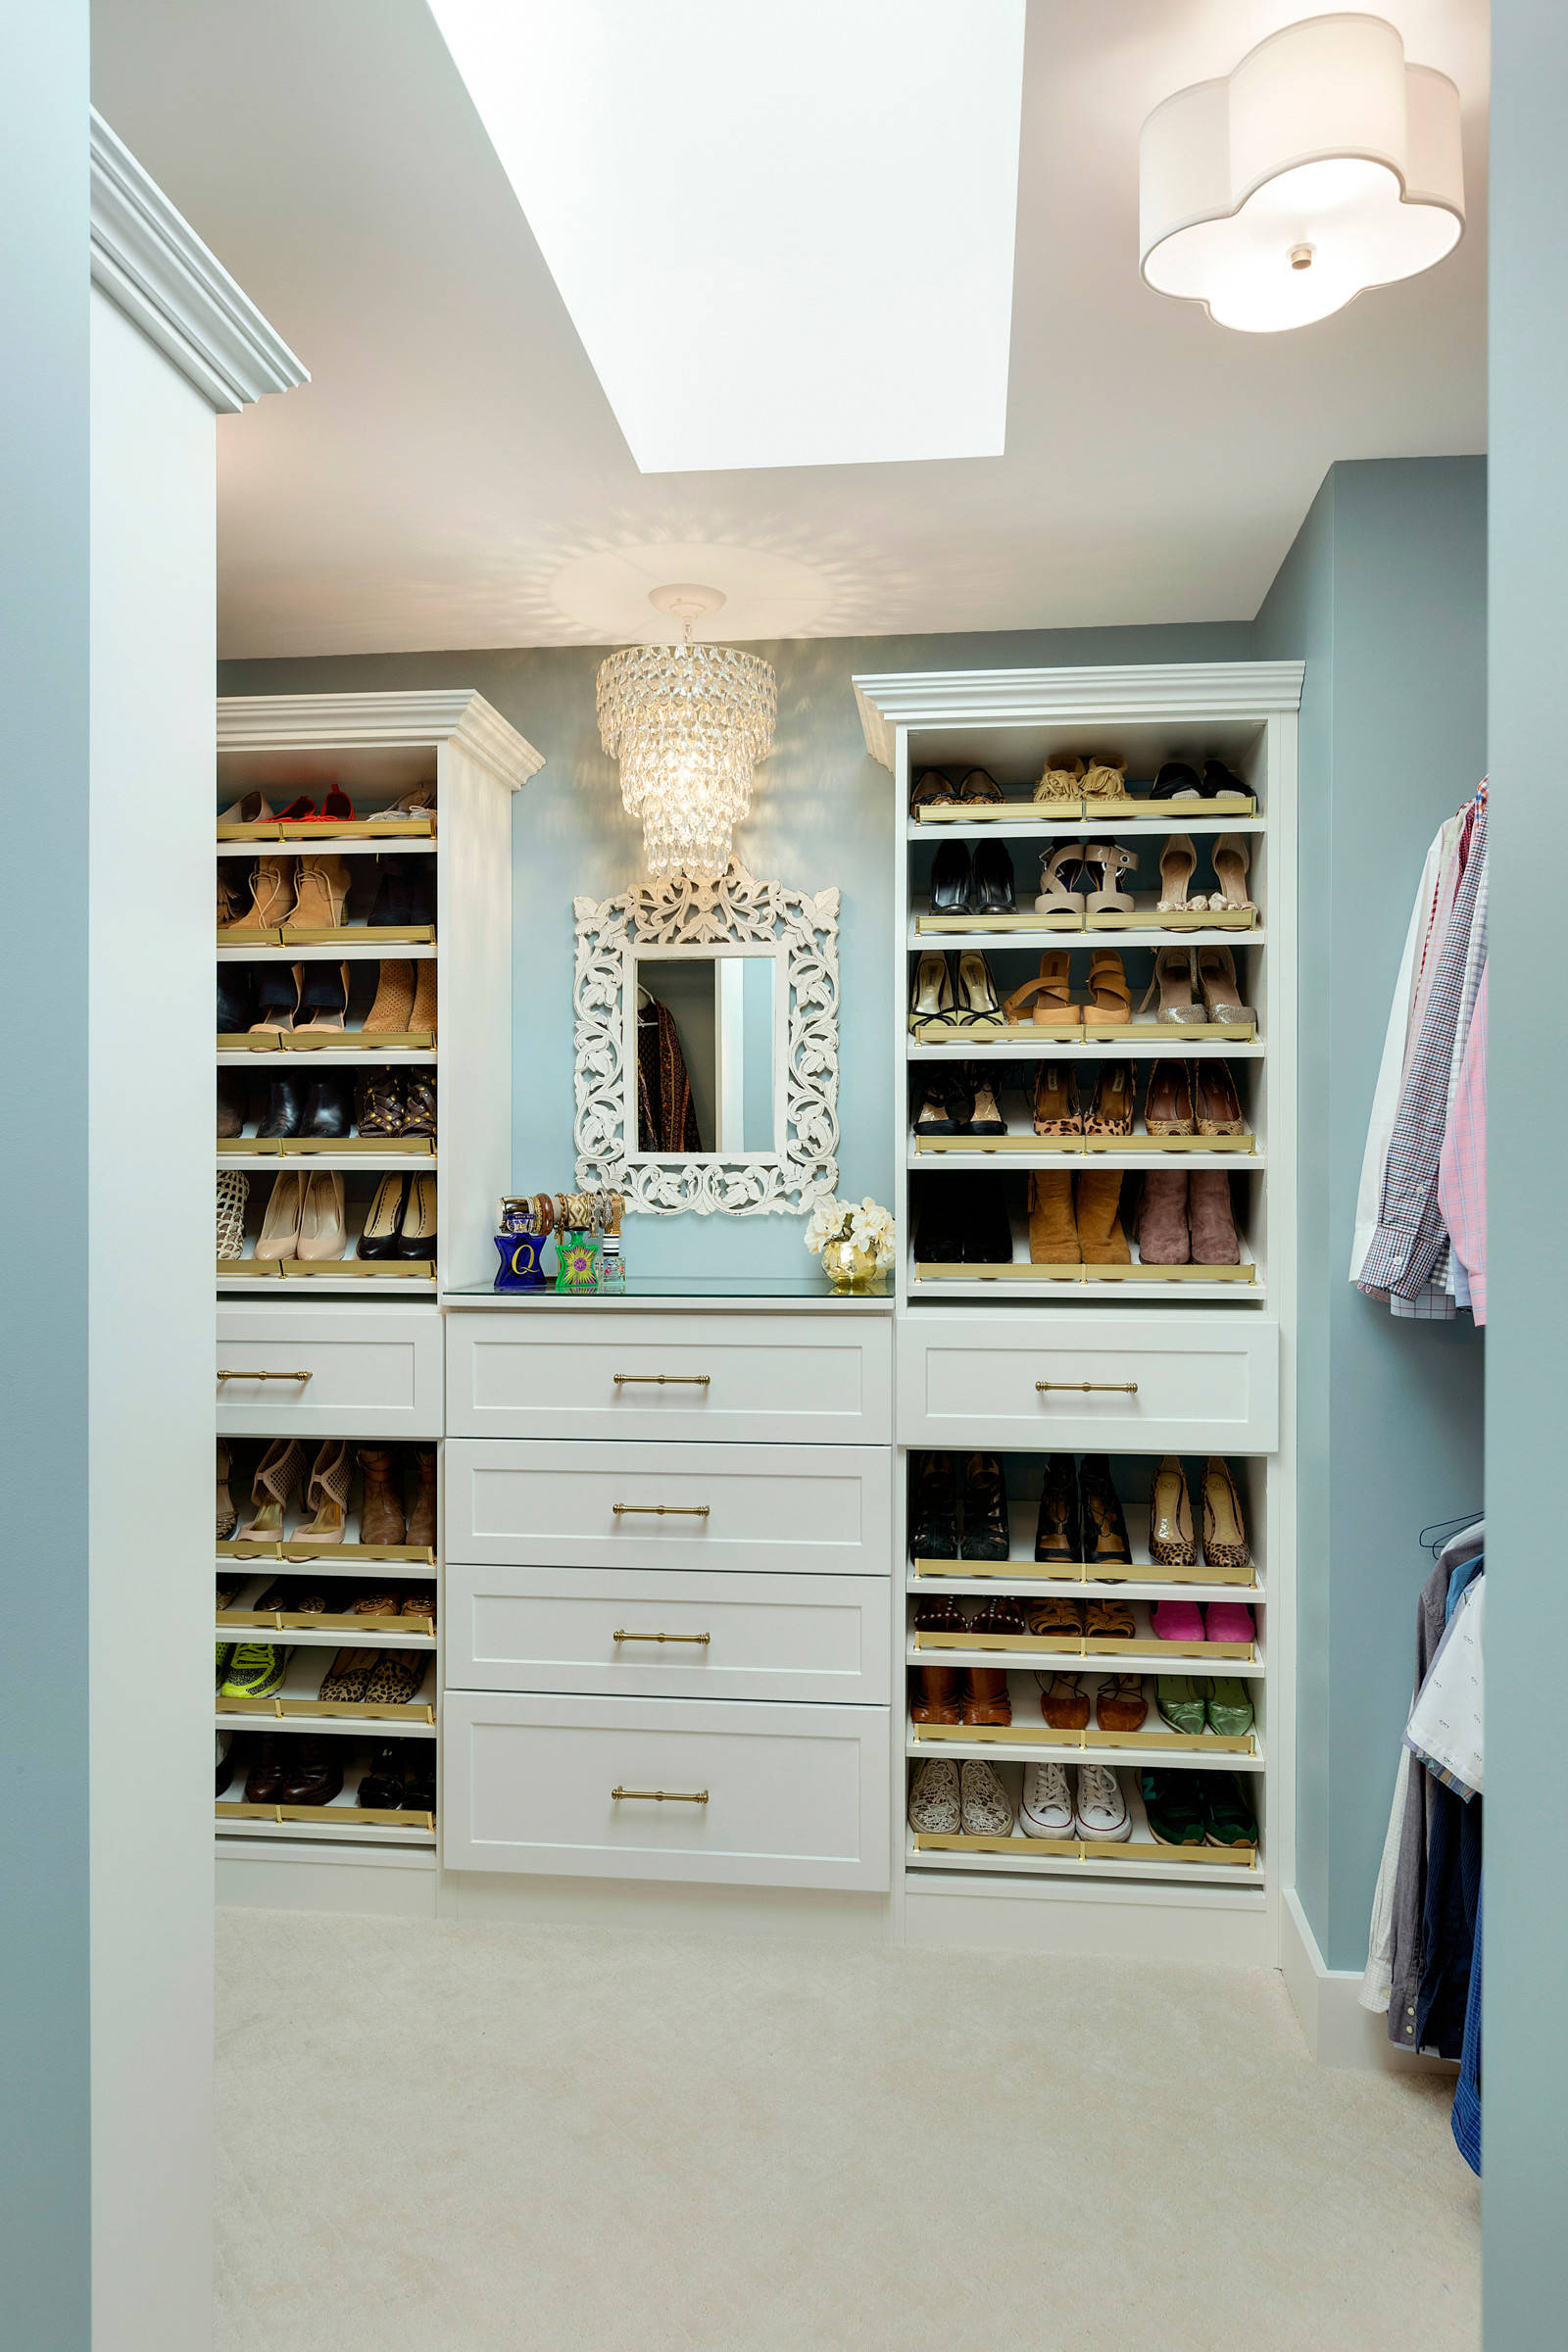 https://st.hzcdn.com/simgs/pictures/closets/french-country-bath-and-walk-in-closet-thompson-construction-img~bec19f8f0830dabf_14-4080-1-898597b.jpg